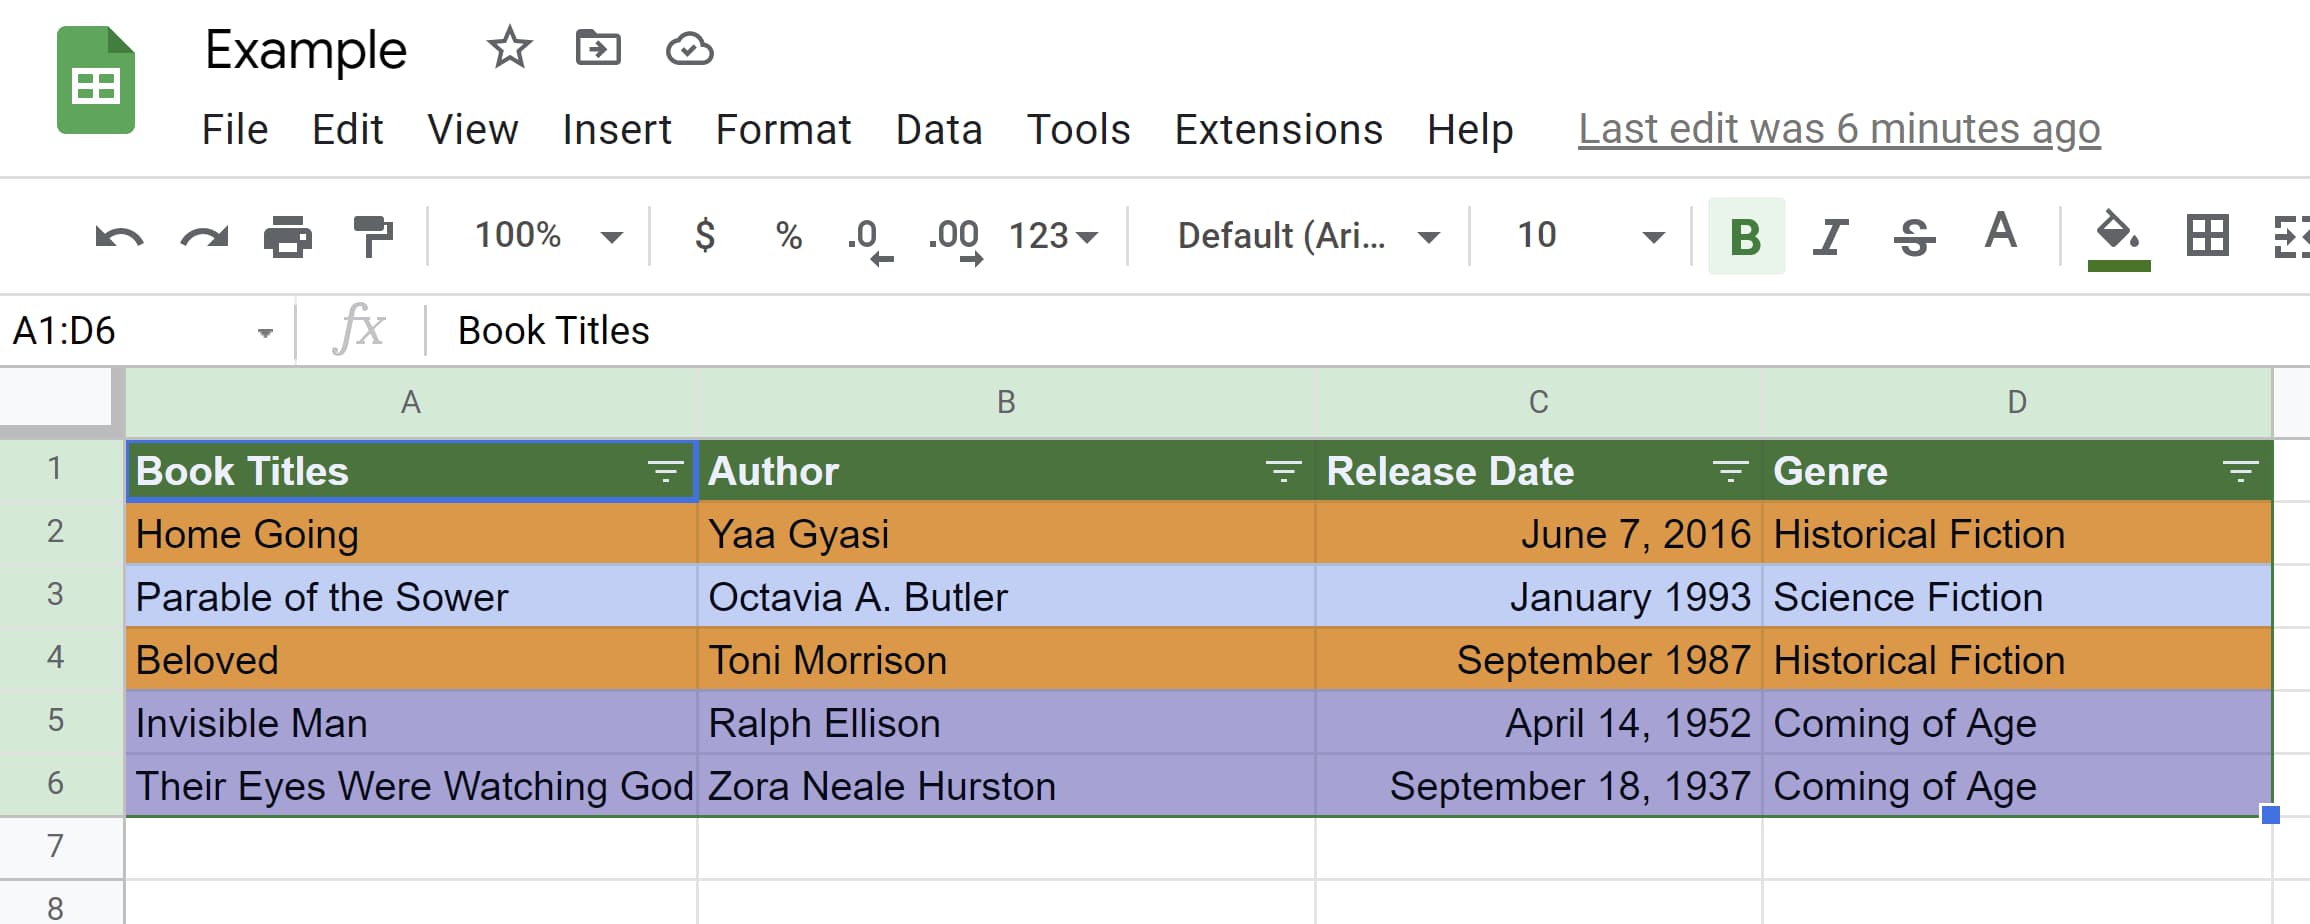 Filters created in Google Sheets